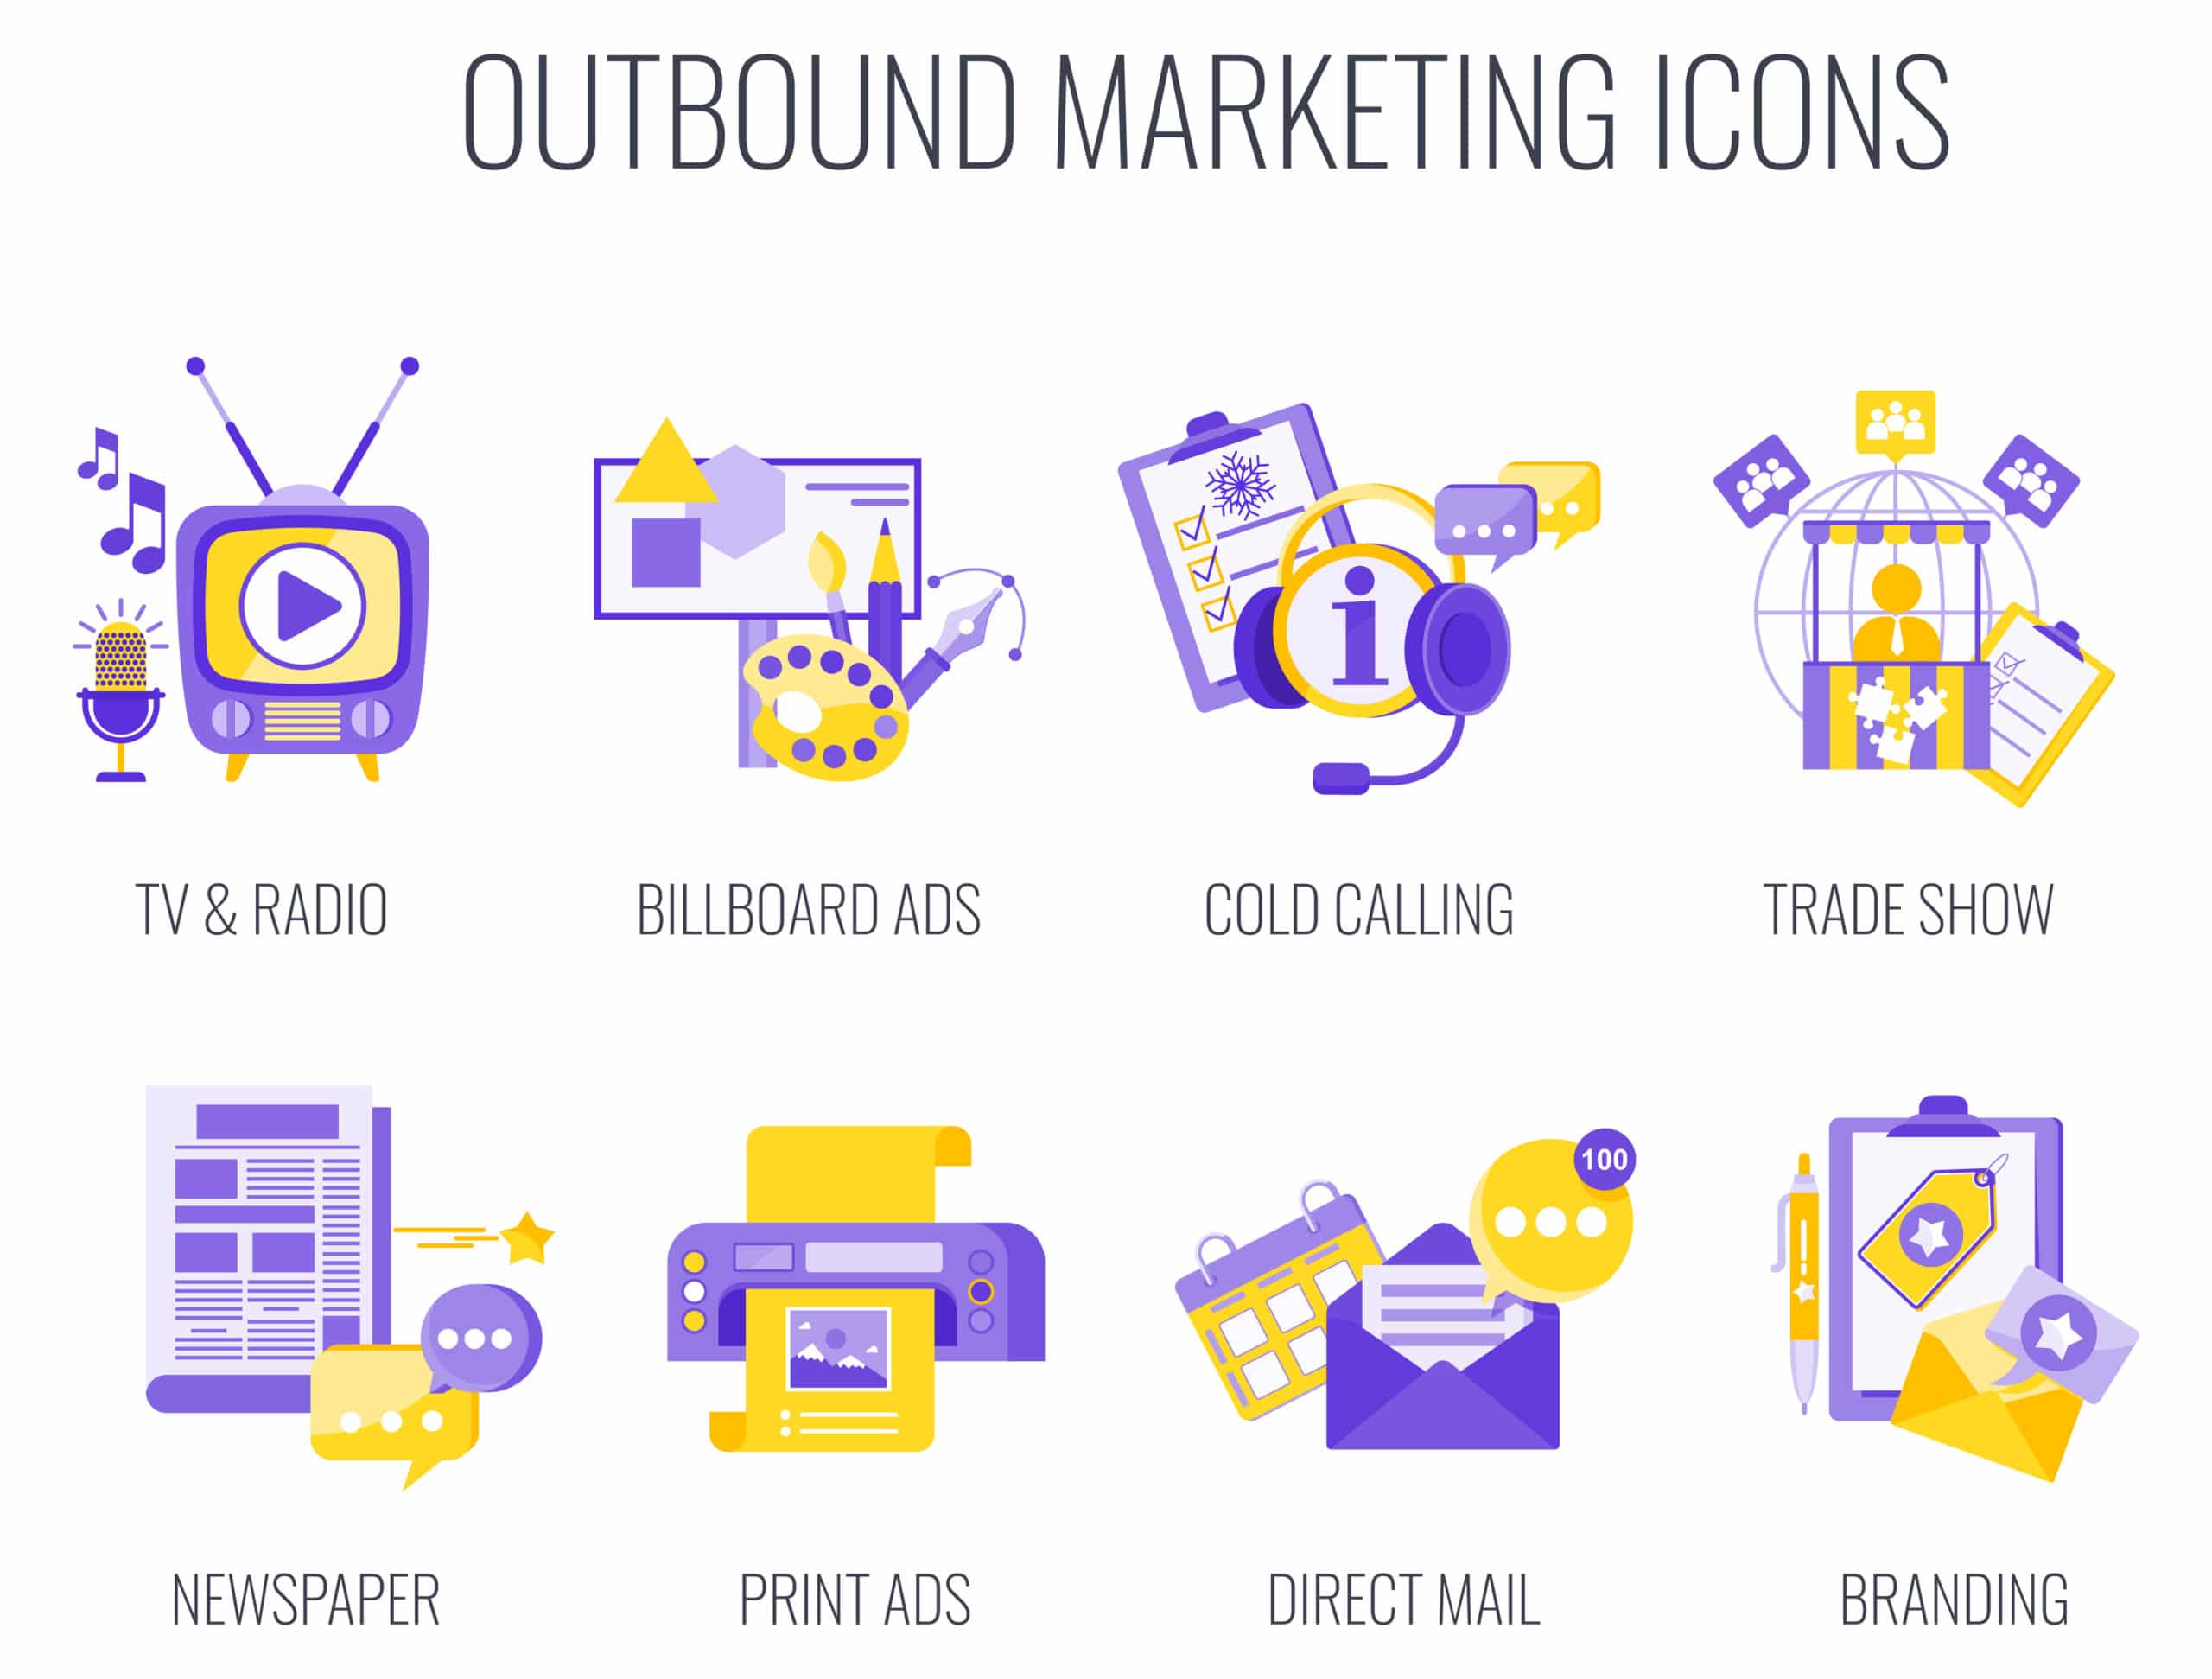 Illustration of Outbound Marketing Options including trade shows and direct mail